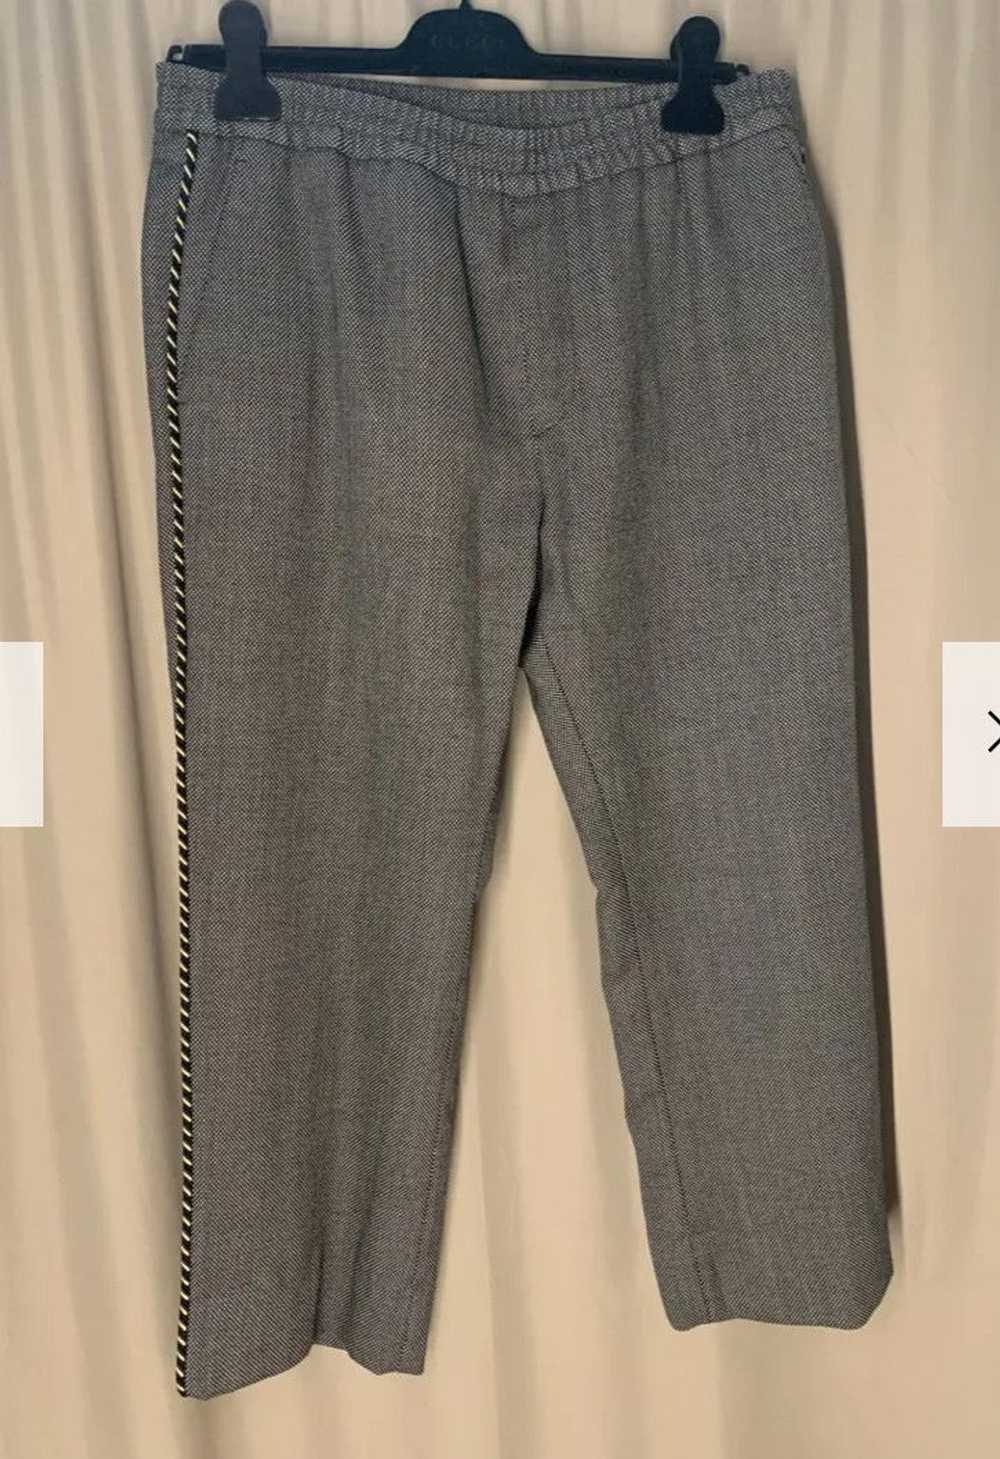 Gucci Casual Drawstring Trousers - image 6